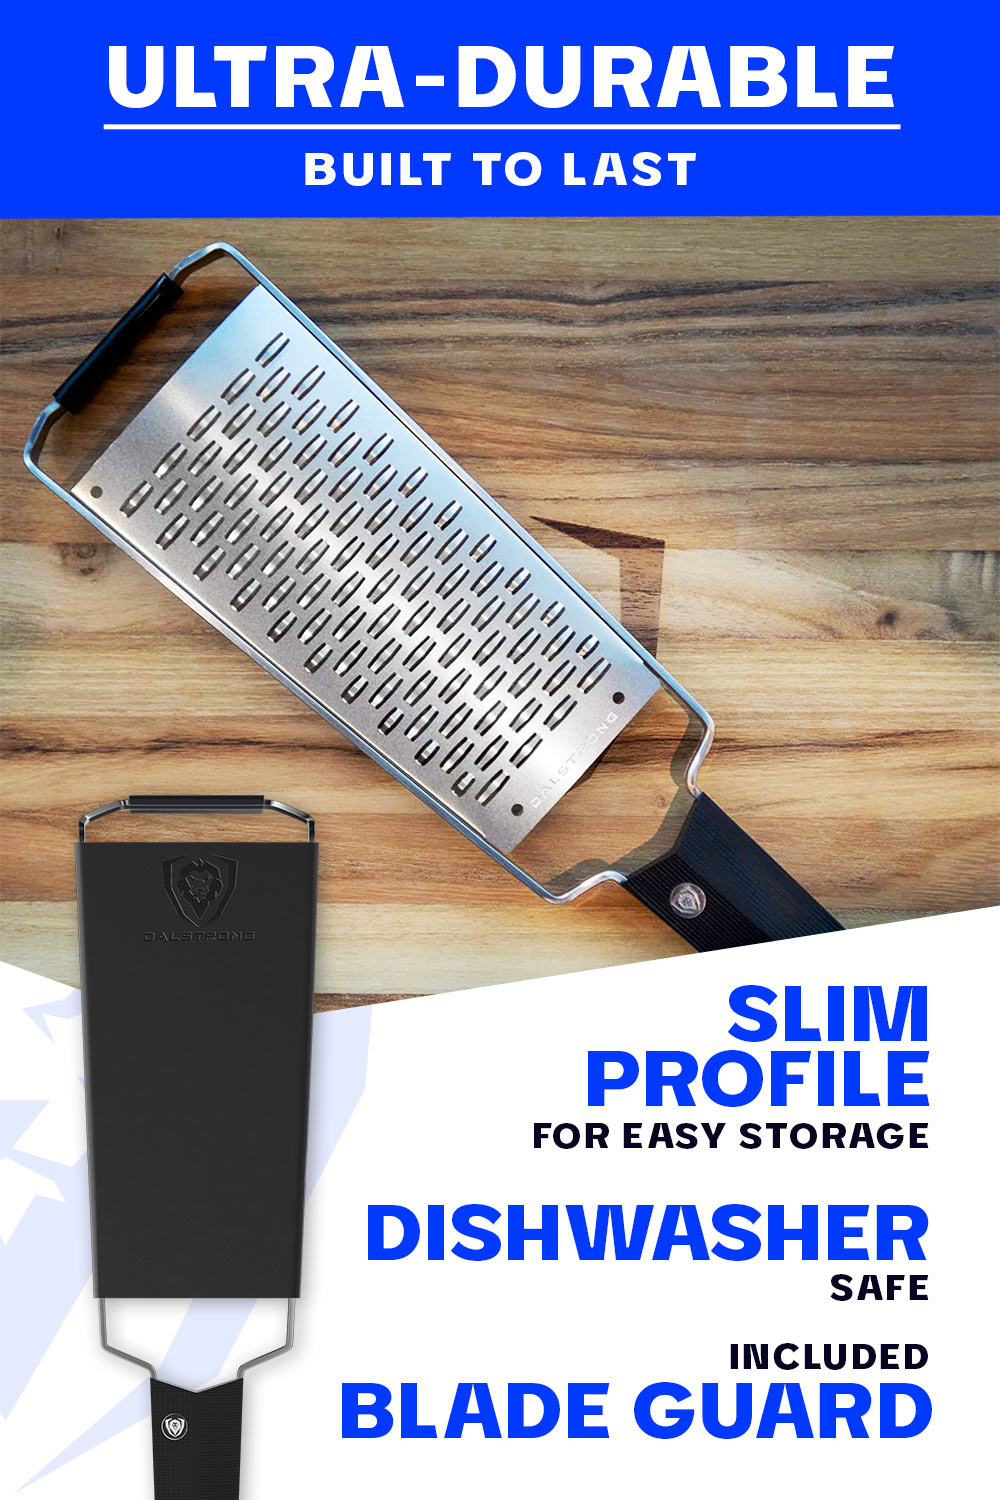 Dalstrong professional ribbon wide cheese grater featuring it's ultra durable and slim design.